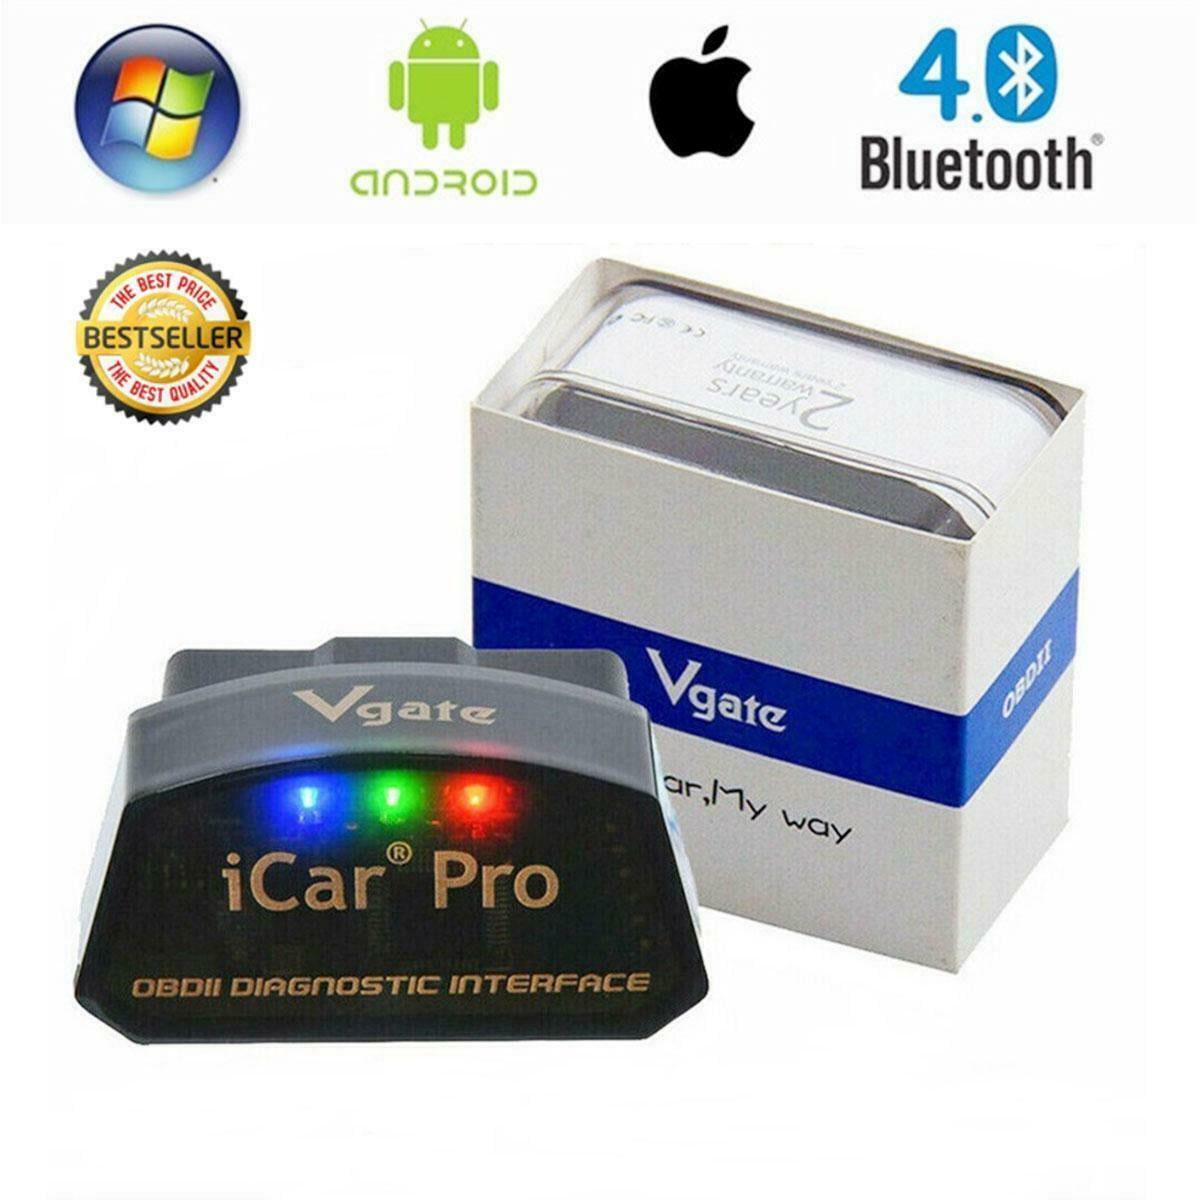 Vgate iCar Pro Bluetooth BLE 4.0 BIMMERCODE BMW Coding iPhone iPad Android OBD2 